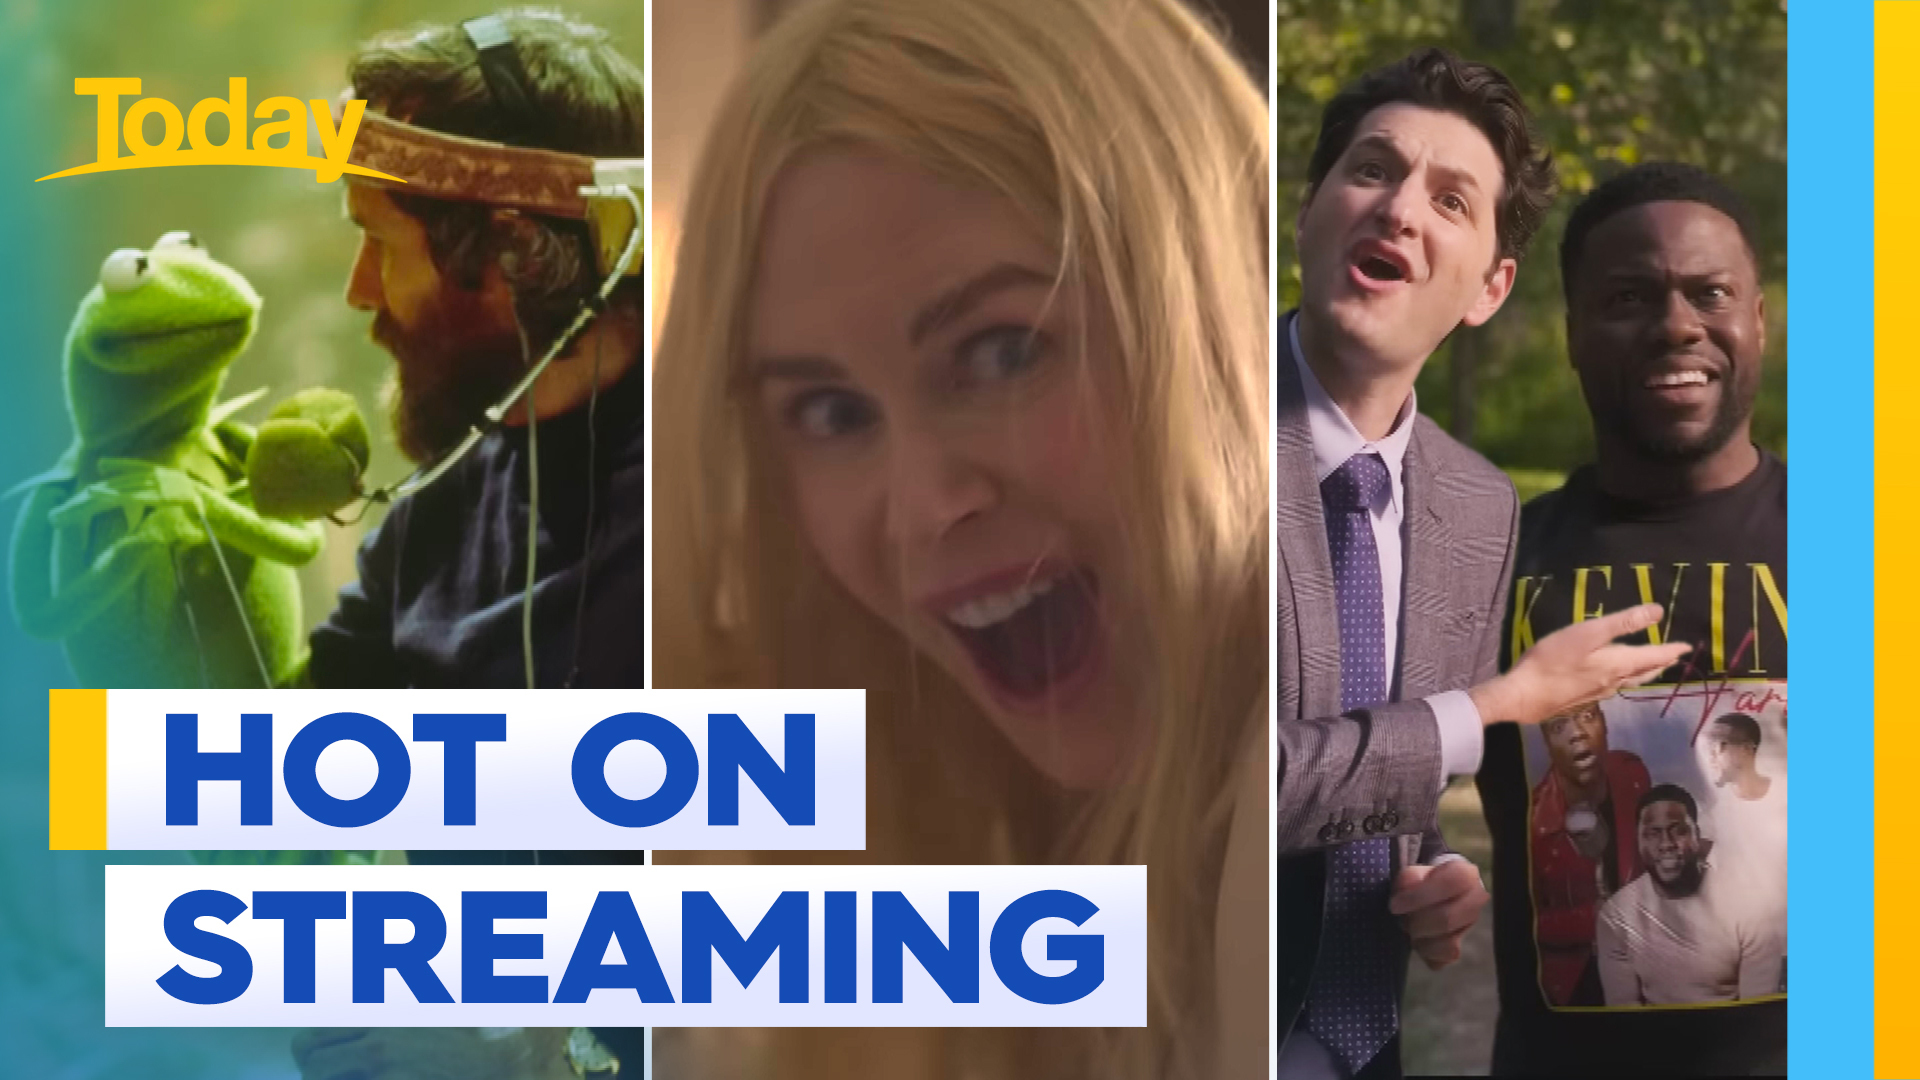 What's hot on streaming this week